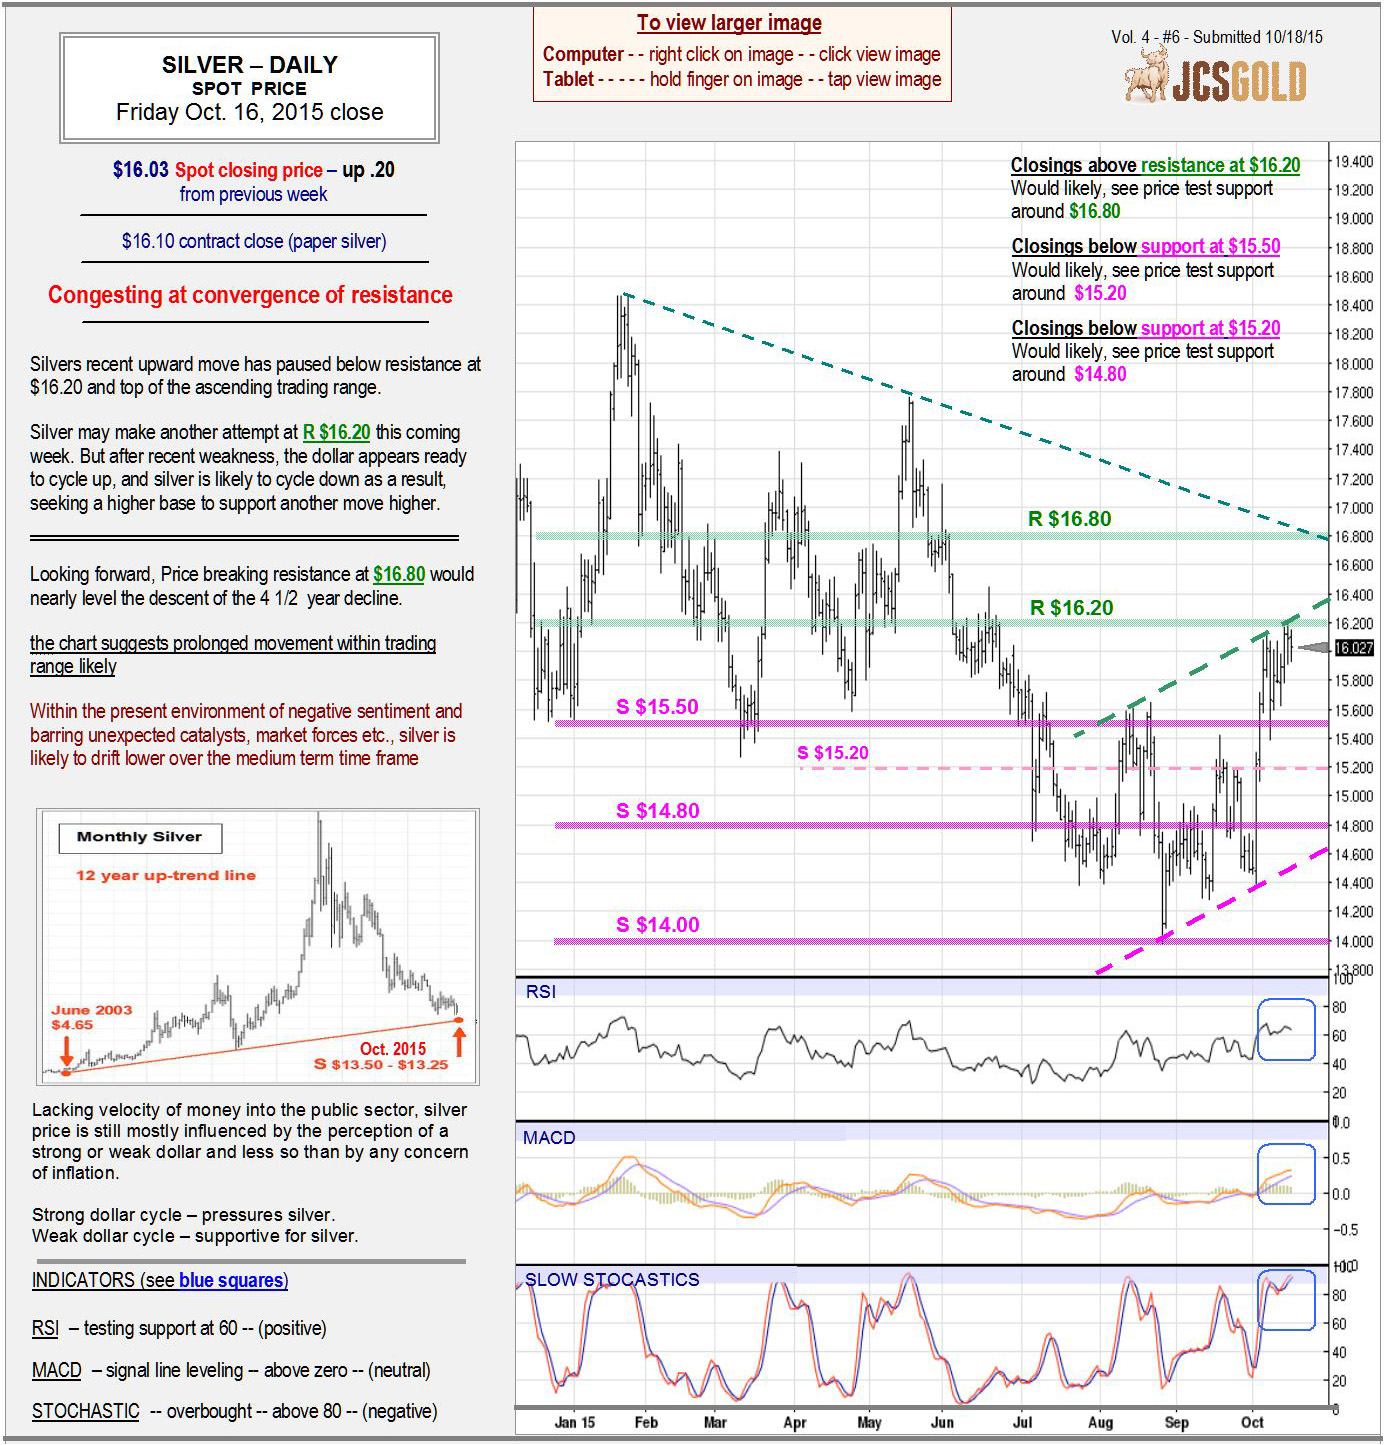 Oct 16, 2015 chart & commentary